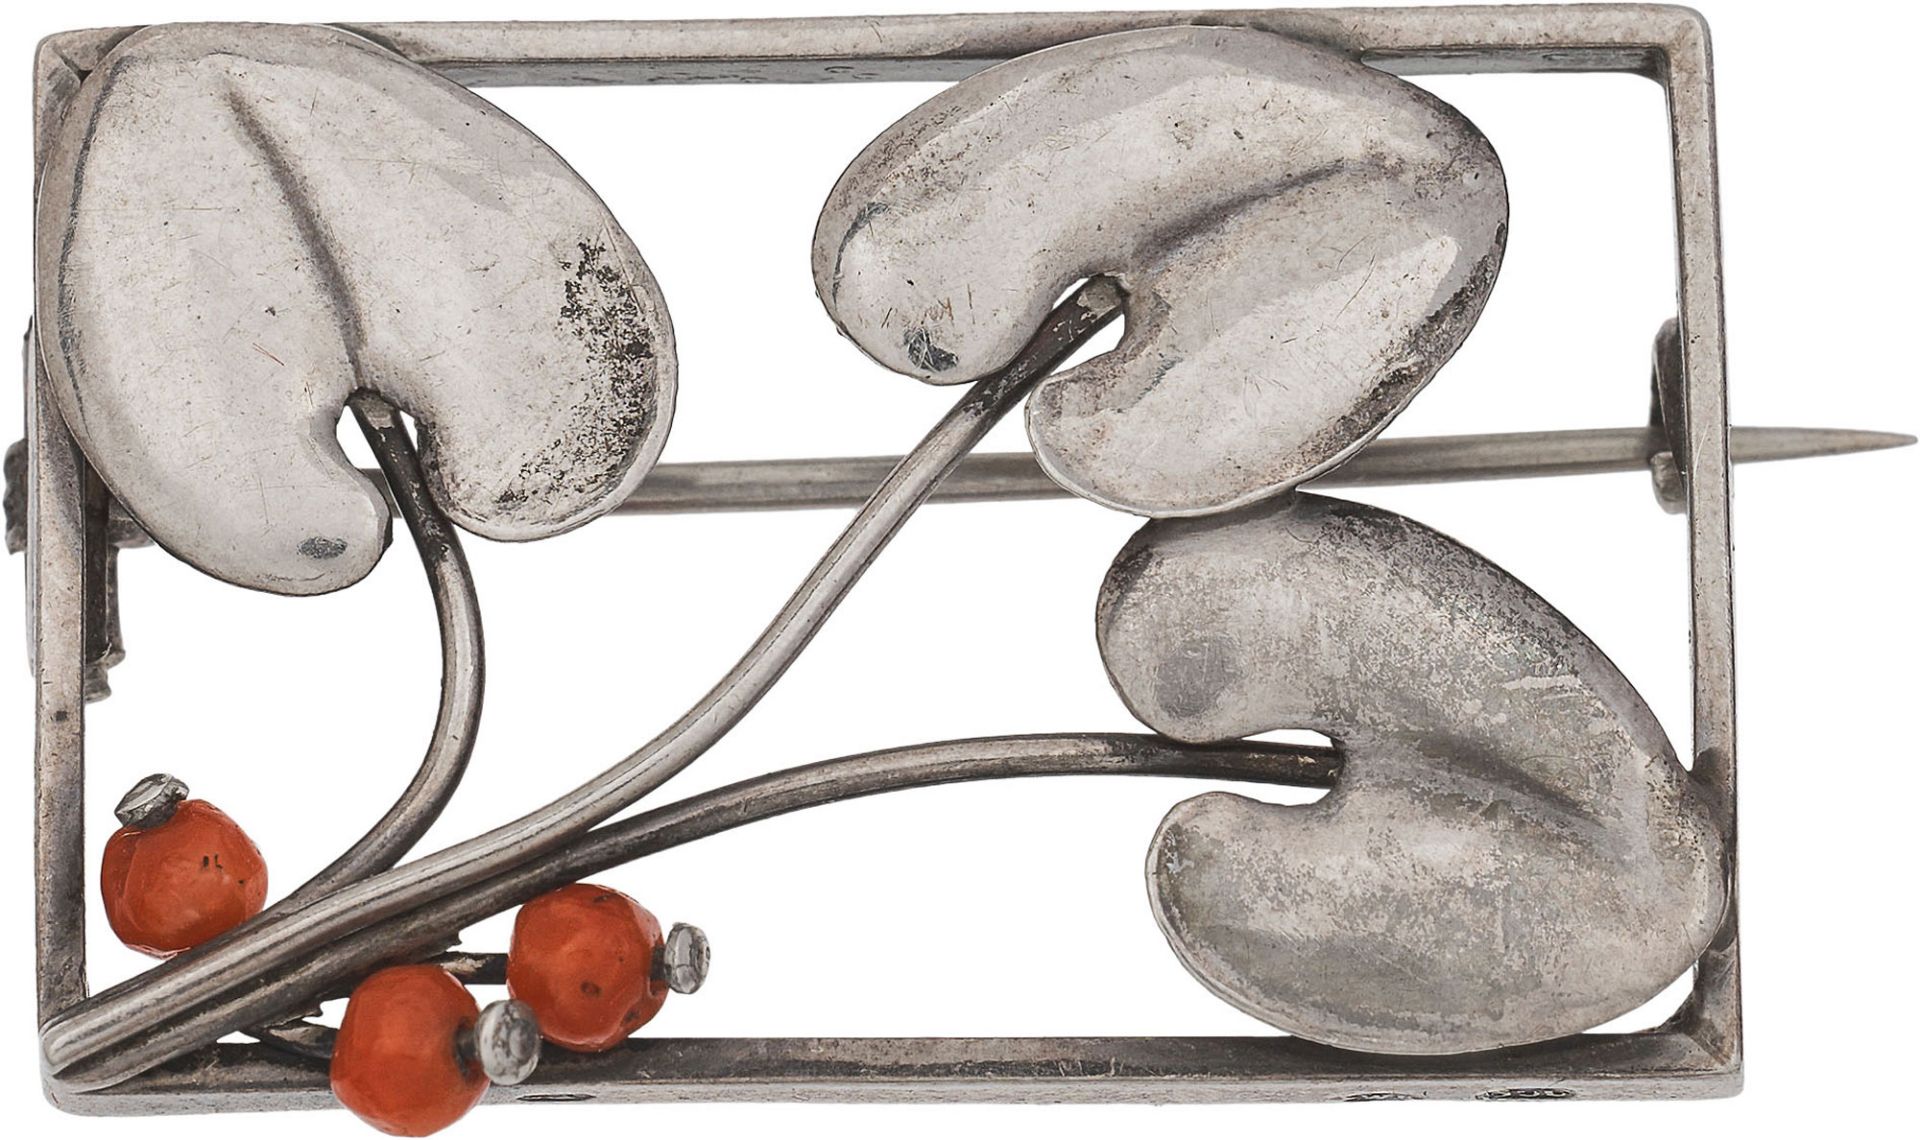 Broochsilver, coral; marked on the side: Vienna toucan hallmark, maker's mark "WK", silver